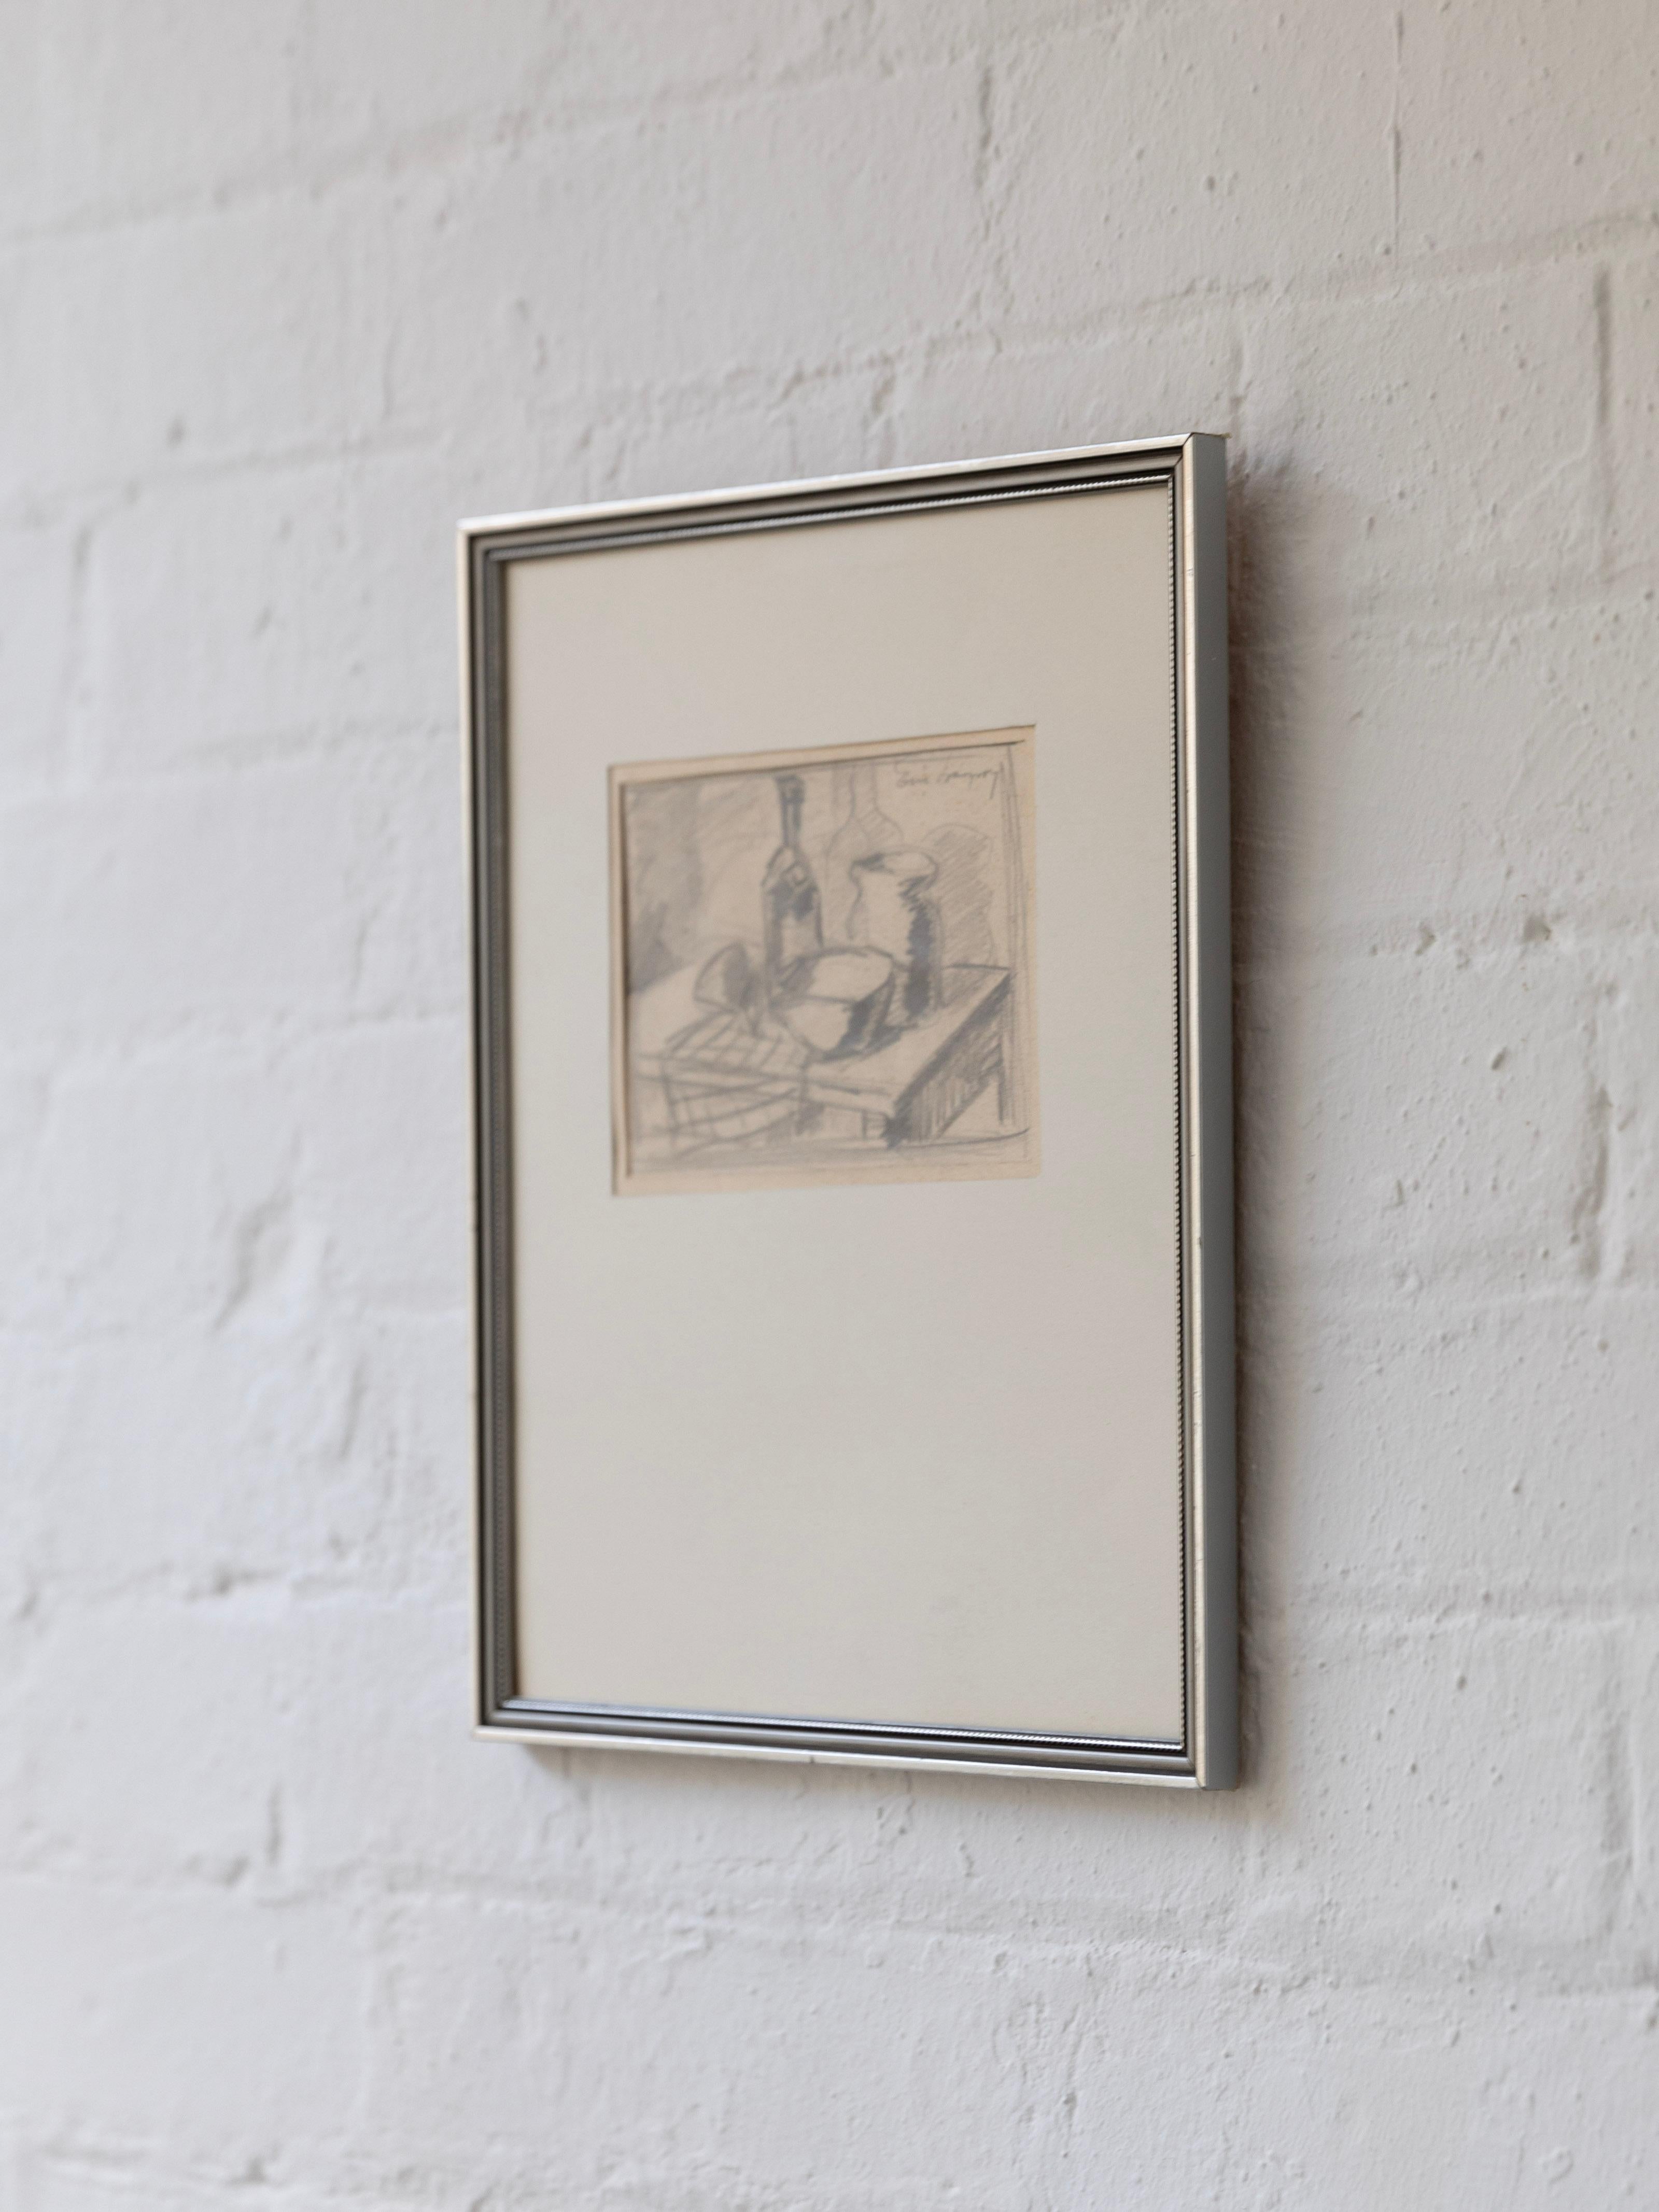 A pencil study of a kitchen tabletop scene, signed by the artist to the upper right corner. Mounted and framed in a slim silver moulding.

Artist: Illegibly signed
Medium: Pencil on paper
Dimensions: H 315mm x W 255mm
Origin: Sweden
Condition: